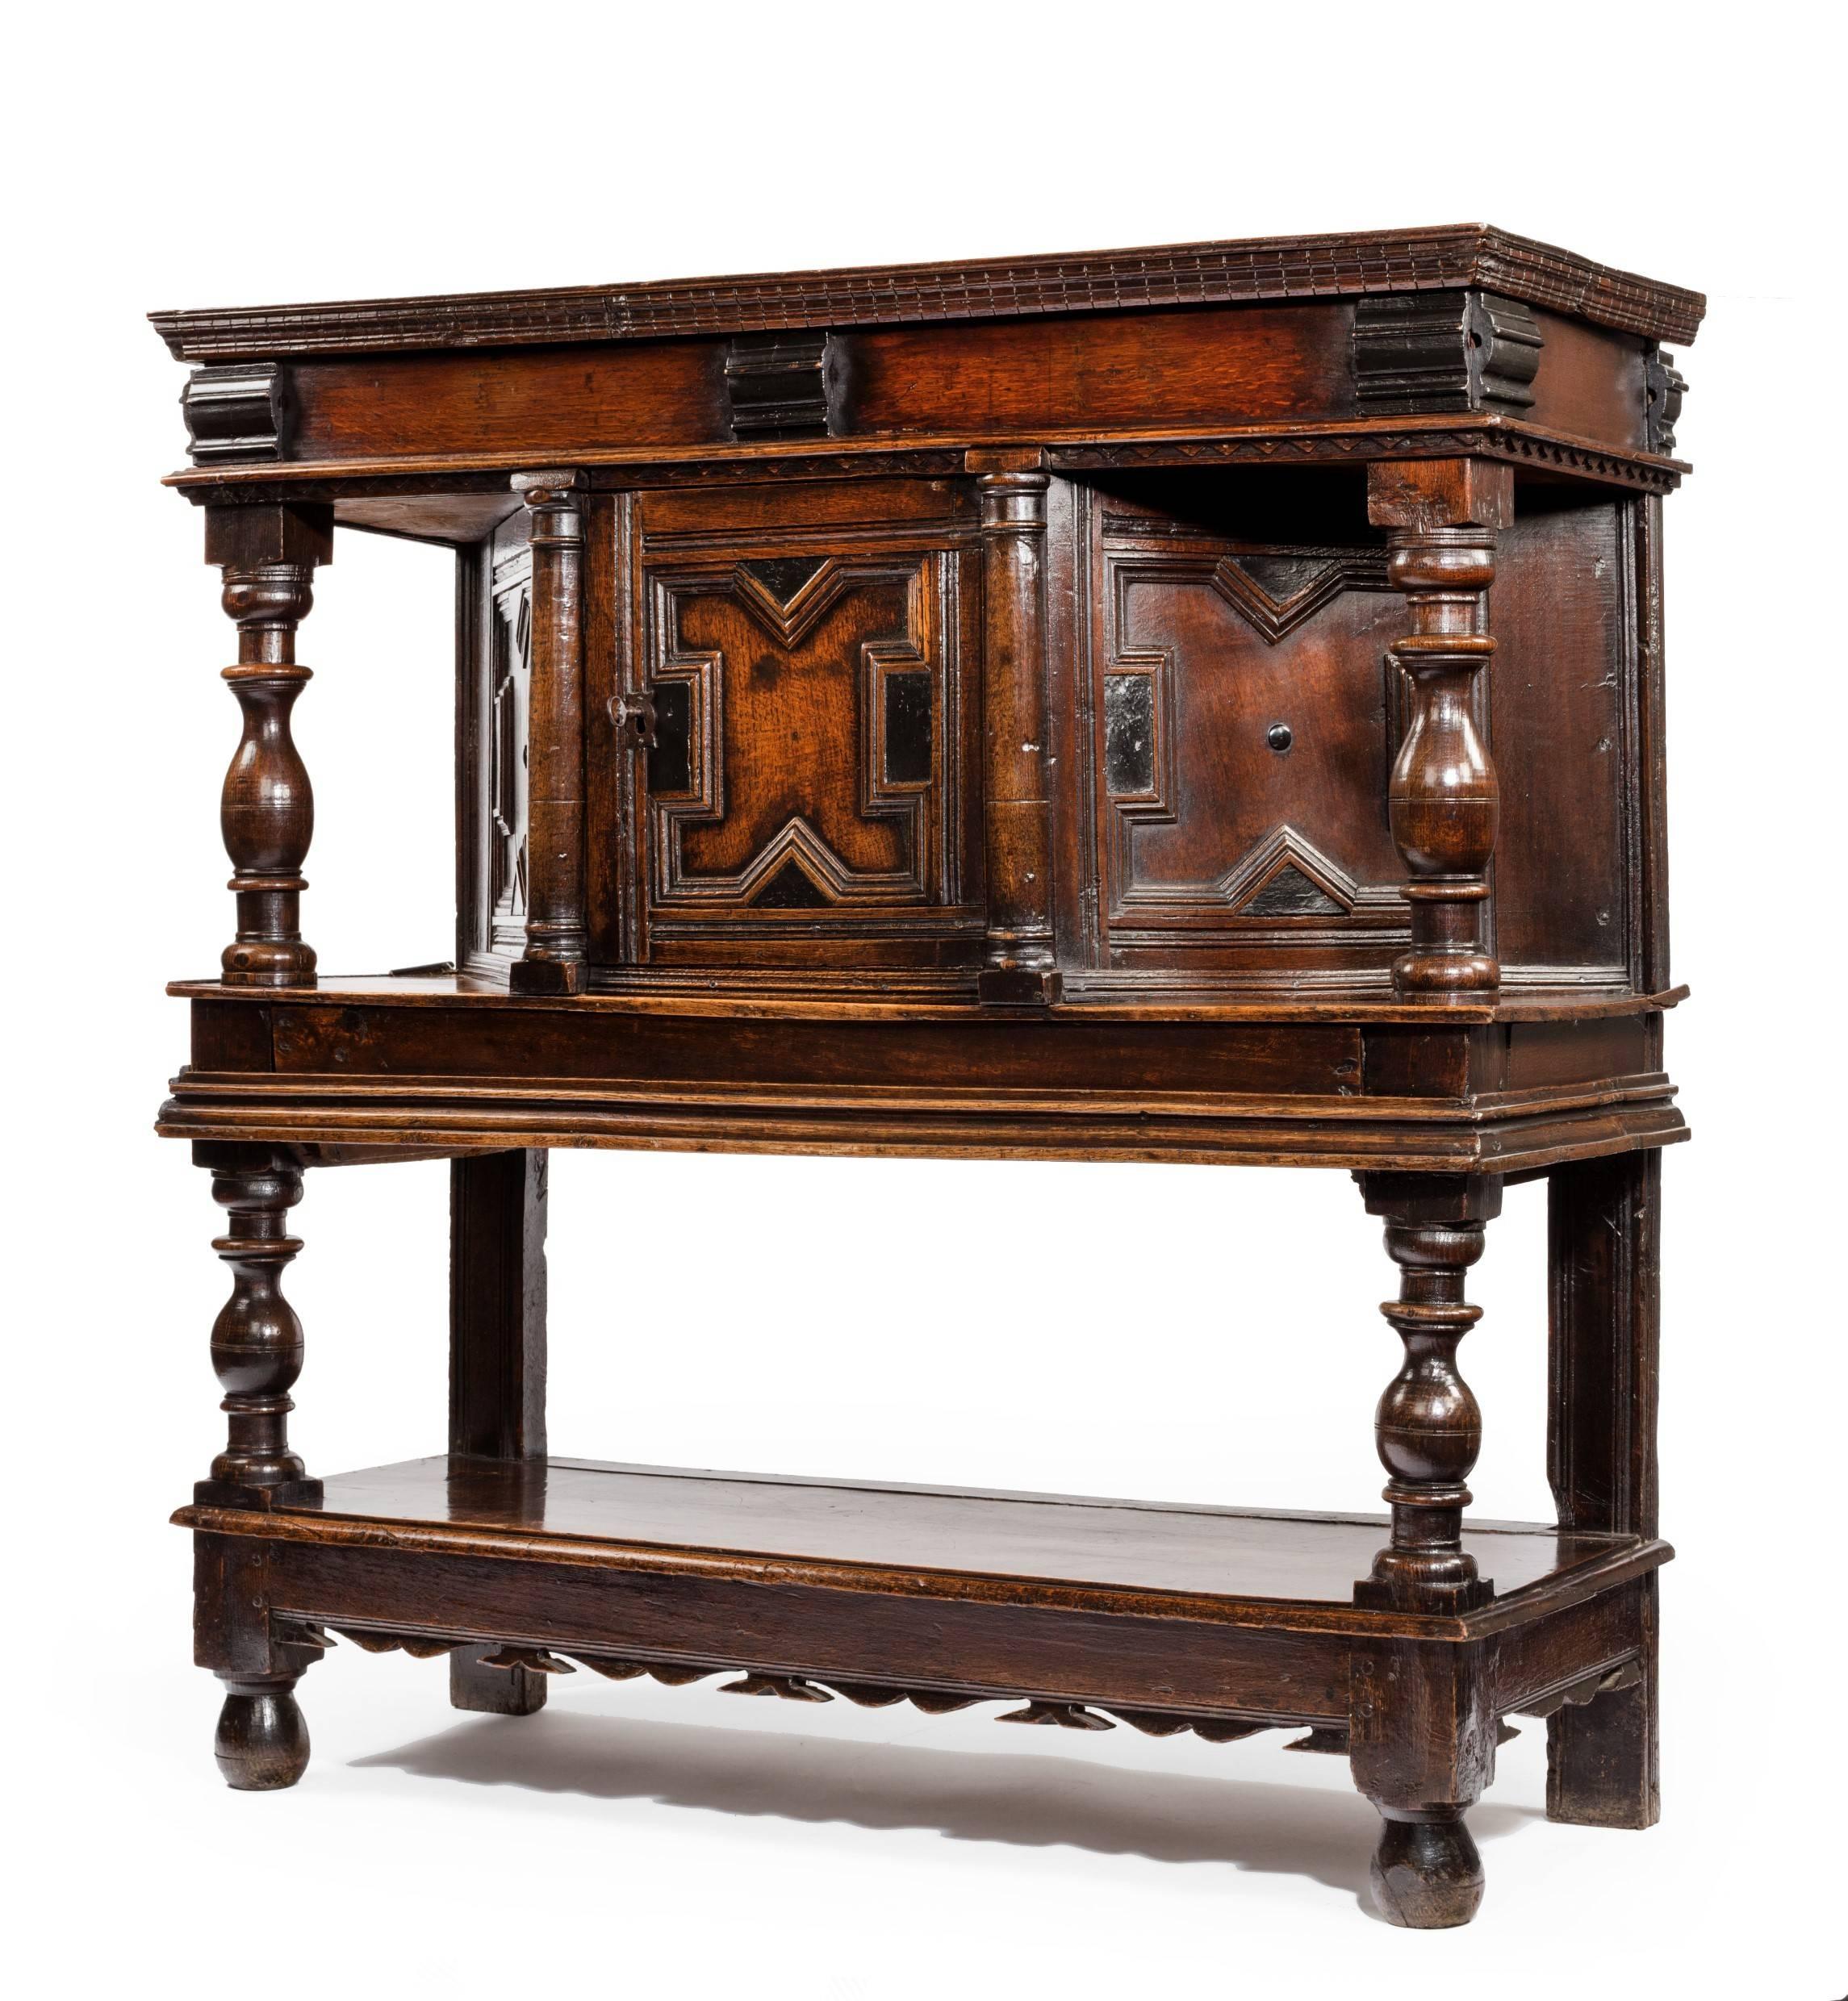 A 17th century oak joined court cupboard made in two sections. The upper part has a secret lift-up lid below the dental type mouldings. The elegant baluster shaped supports geometric moulding with small ebony pieces. Angled side panels and central